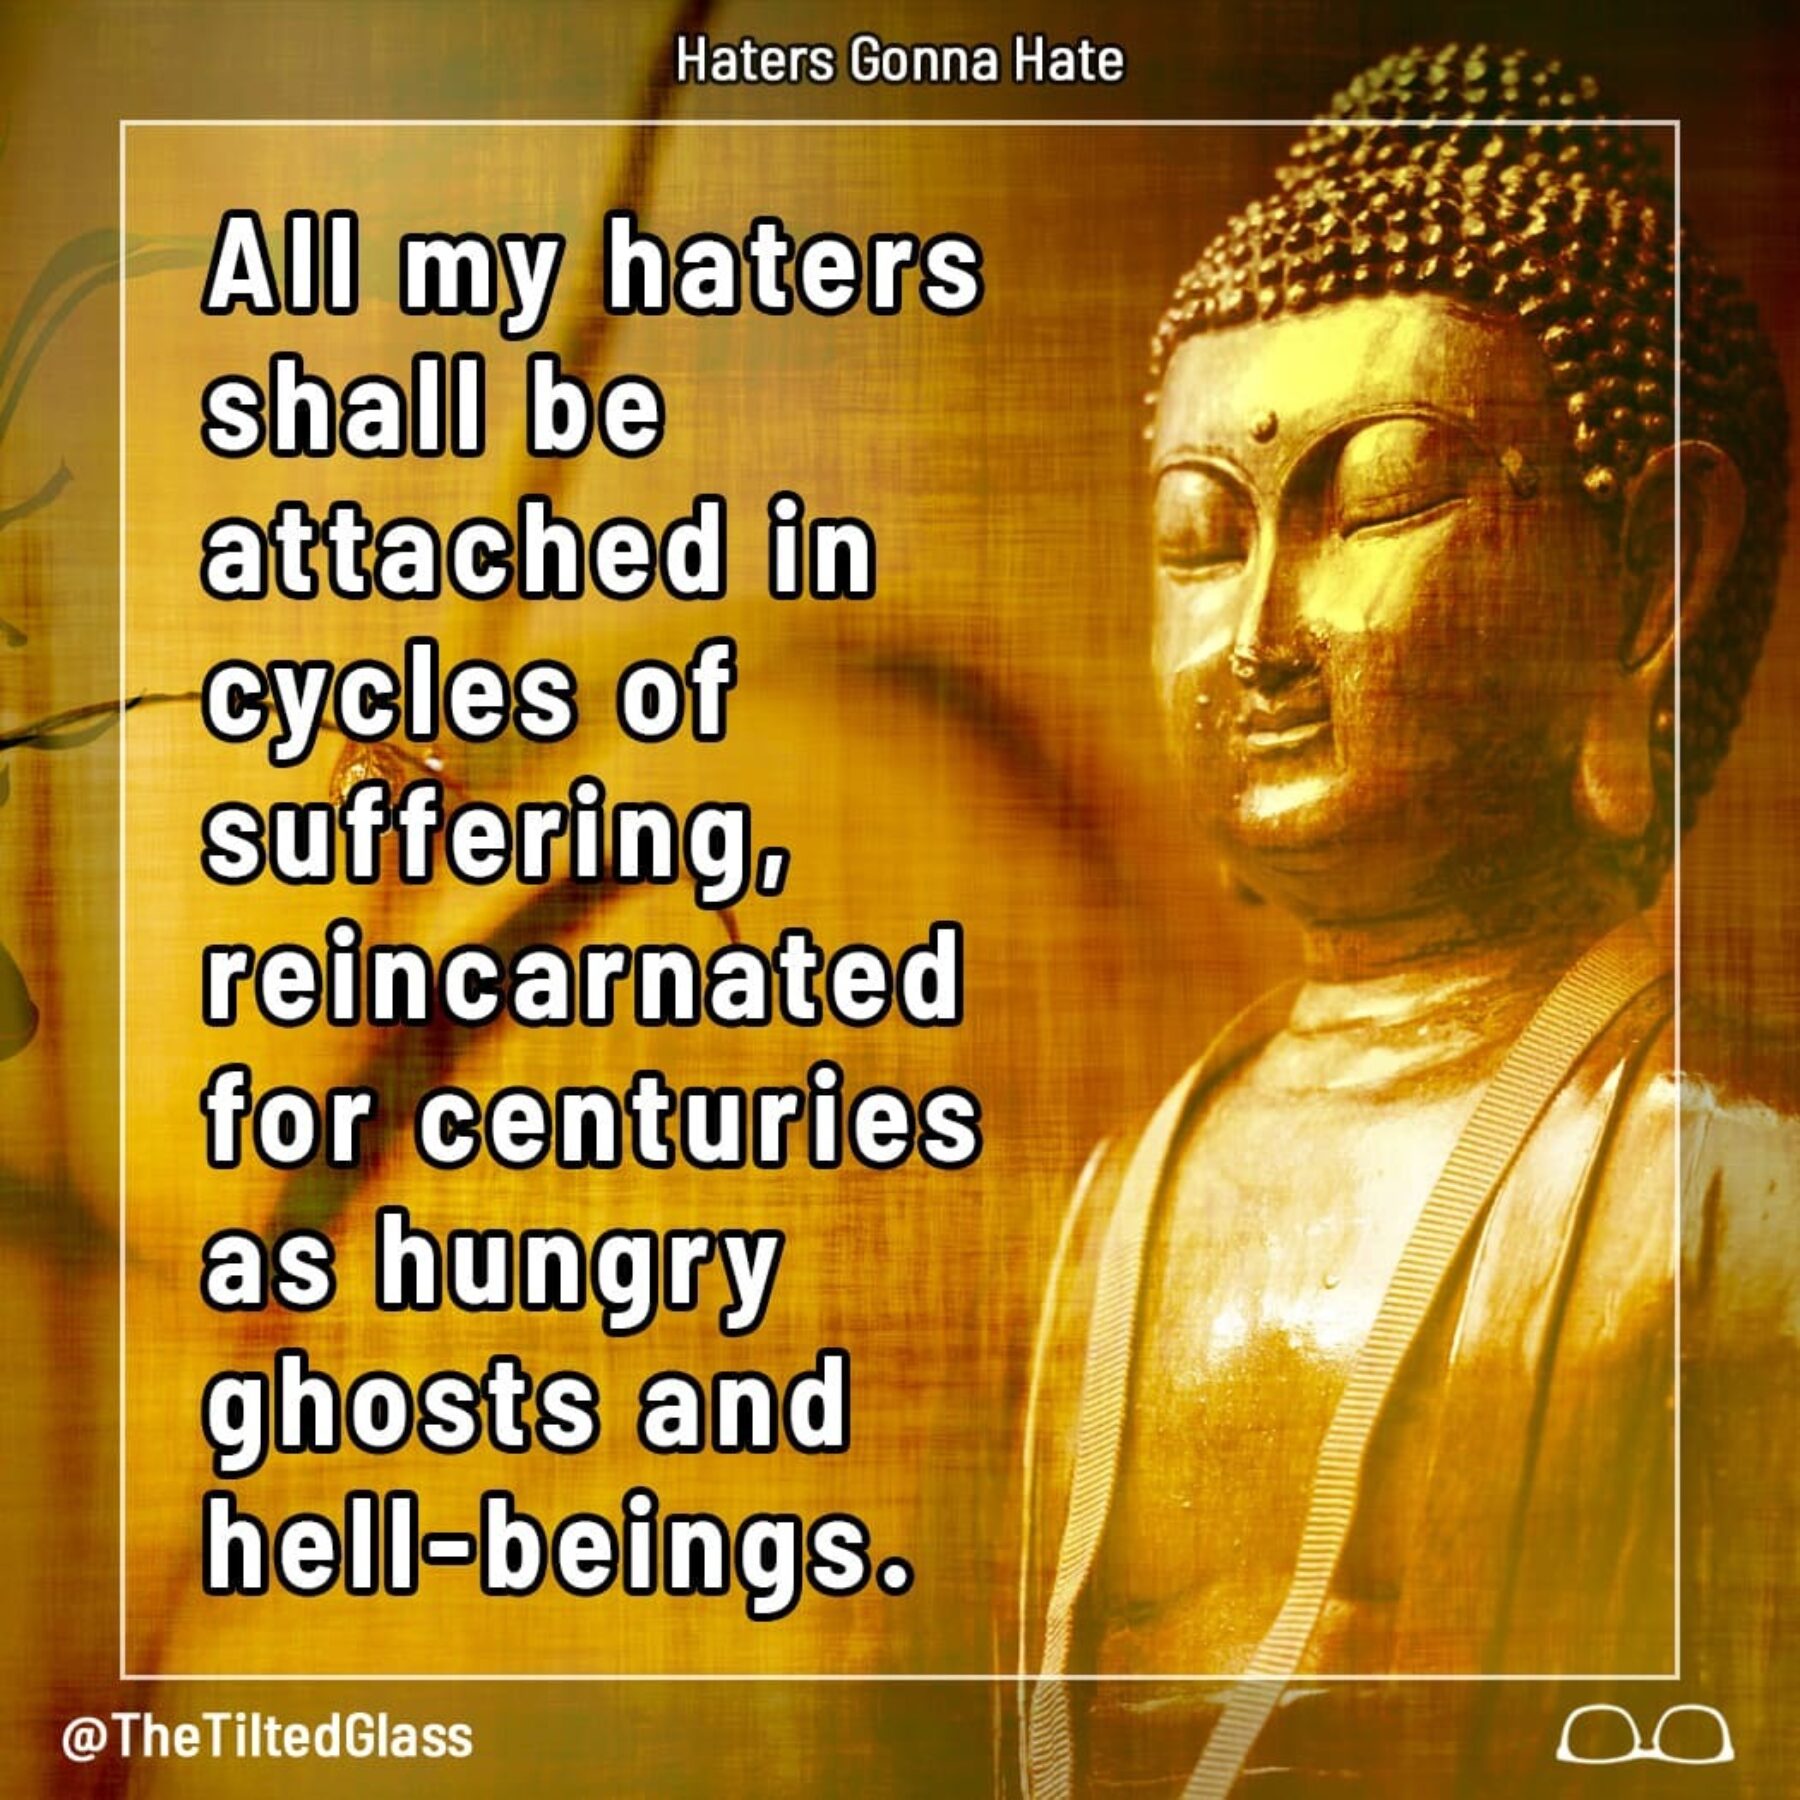 Ancient Texts Write Buddha's Thoughts on Haters